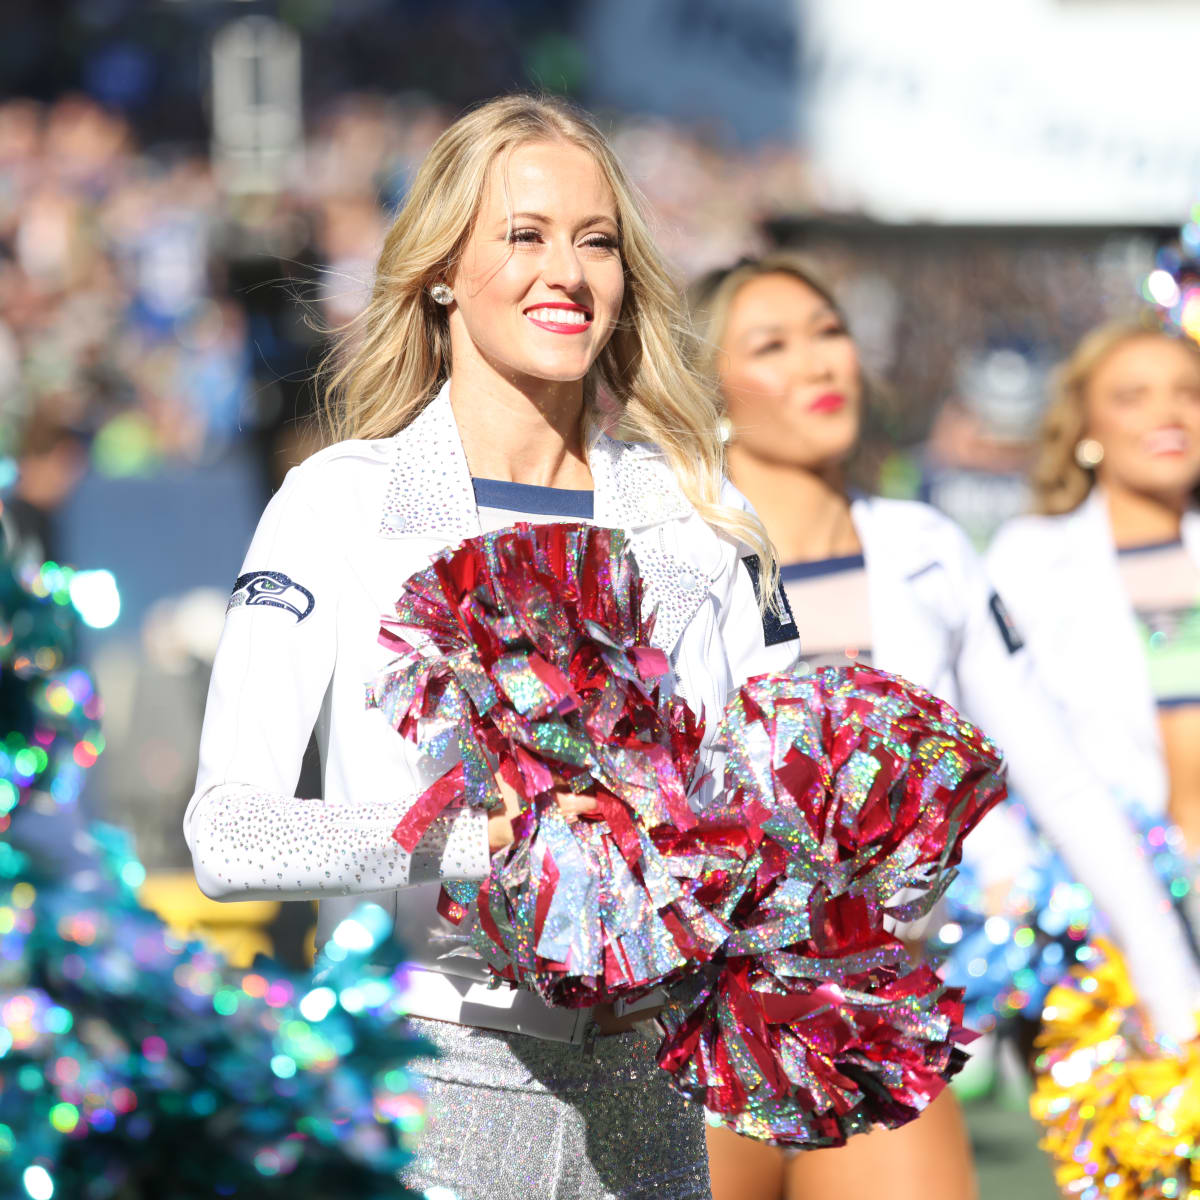 Look: Seahawks Cheerleaders New Outfit Going Viral - The Spun: What's  Trending In The Sports World Today